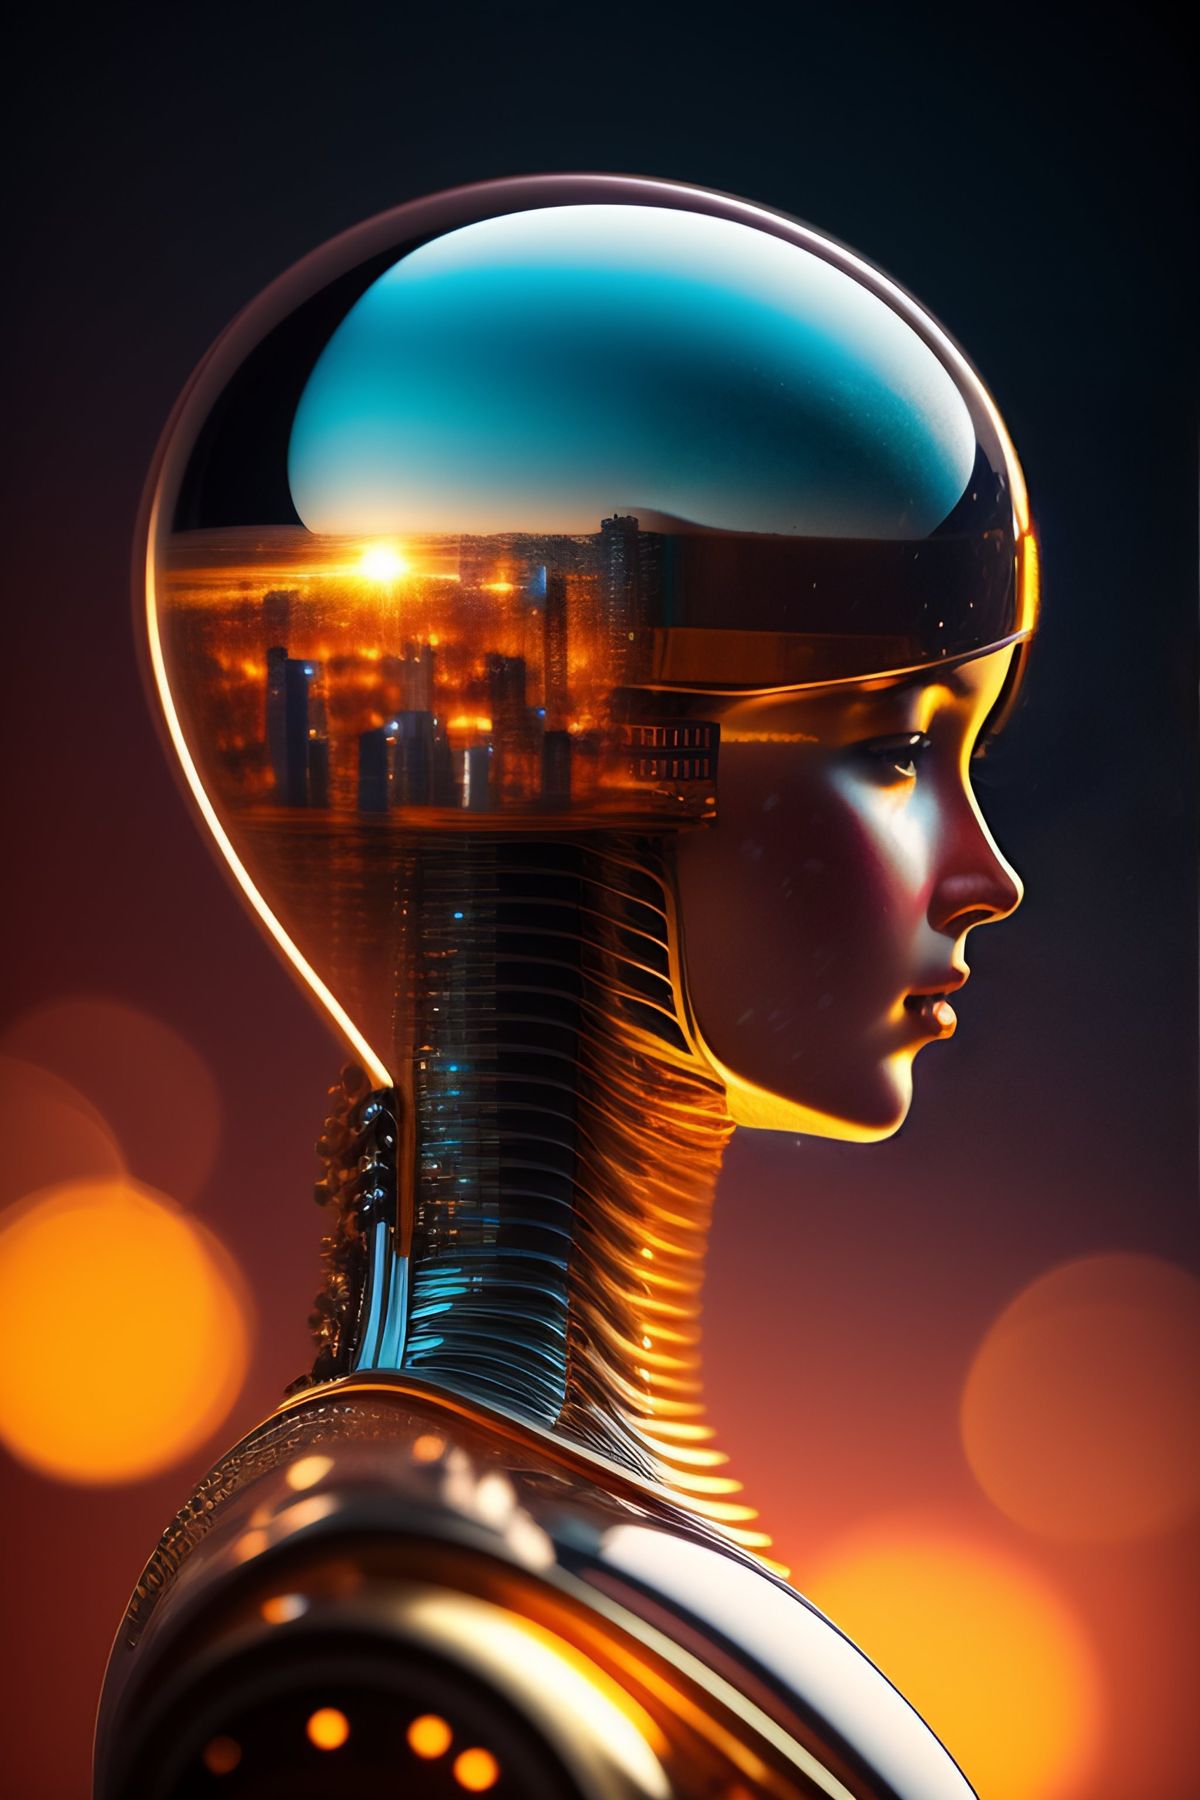 The Singularity and Transcendence: Human-Machine Integration in Sci-Fi Literature